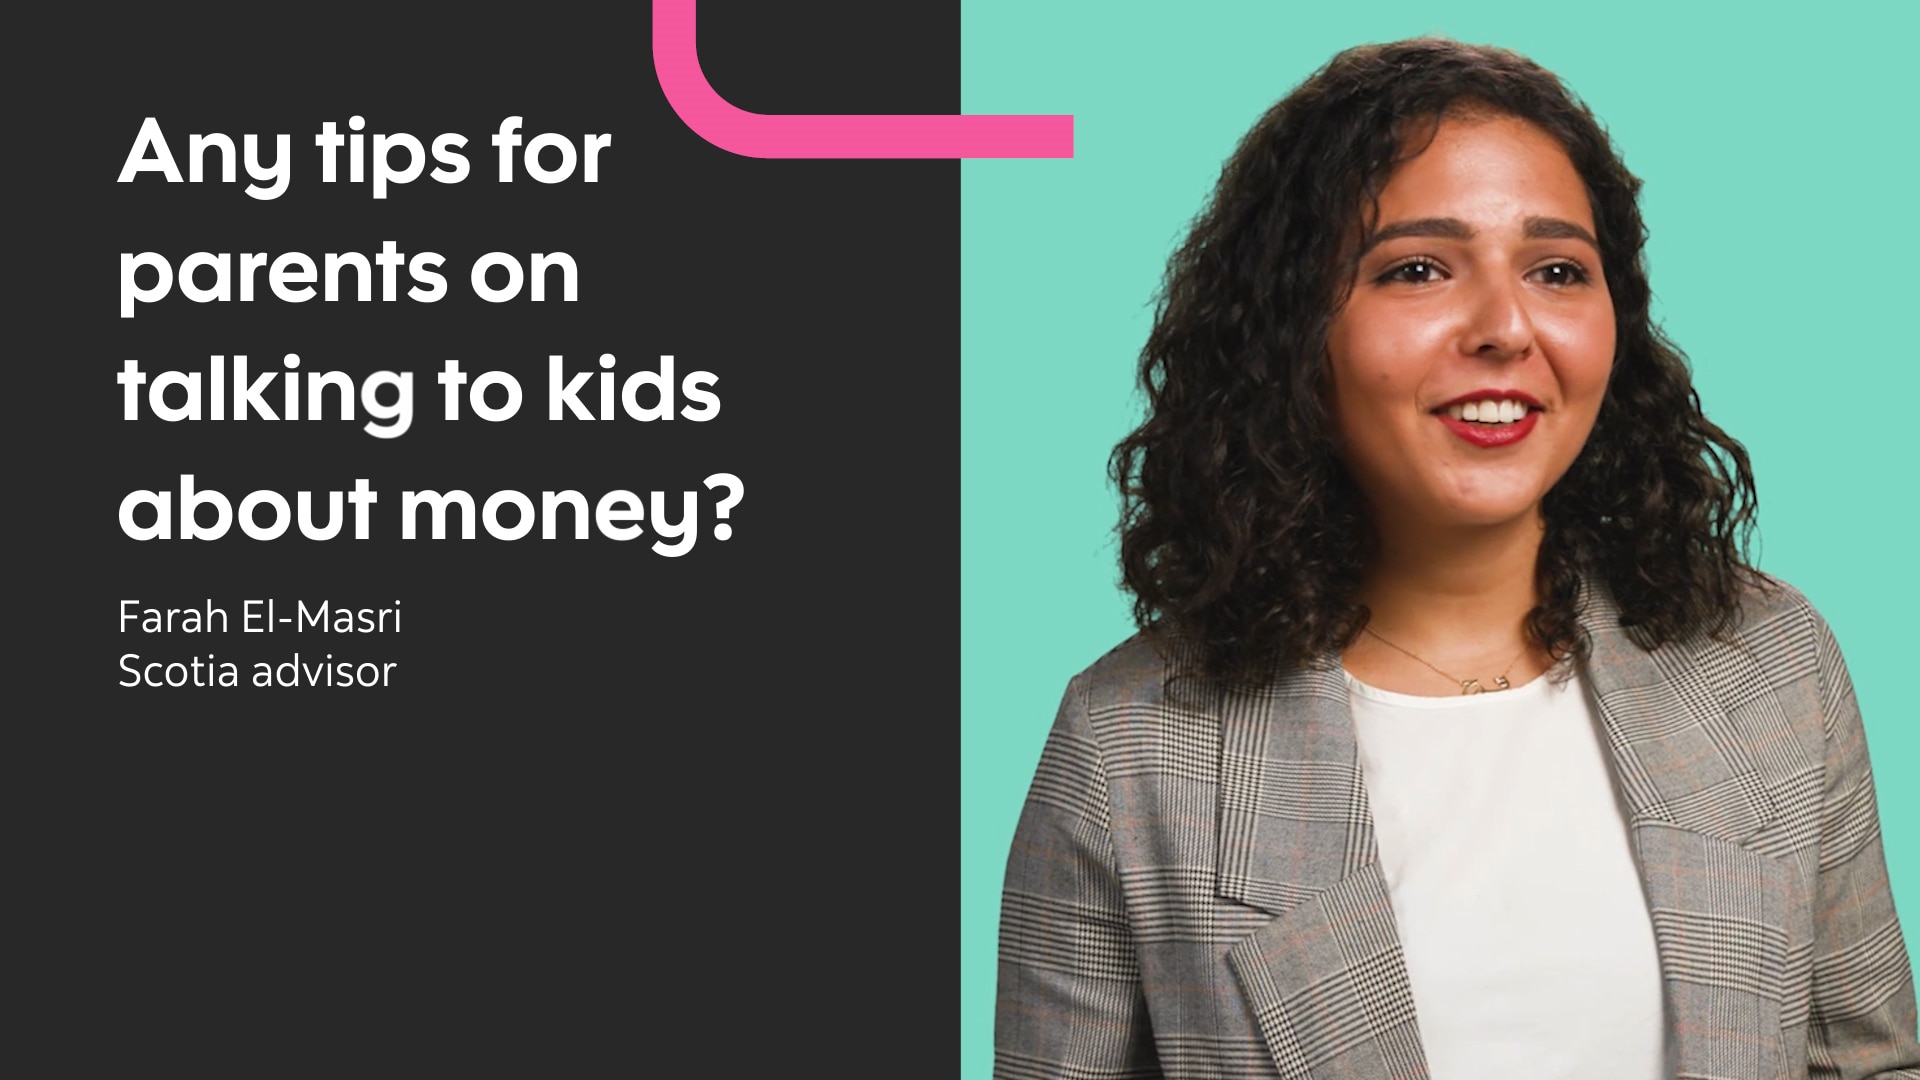 Any tips for parents on talking to kids about money? Farah El-Masri, Scotia Advisor